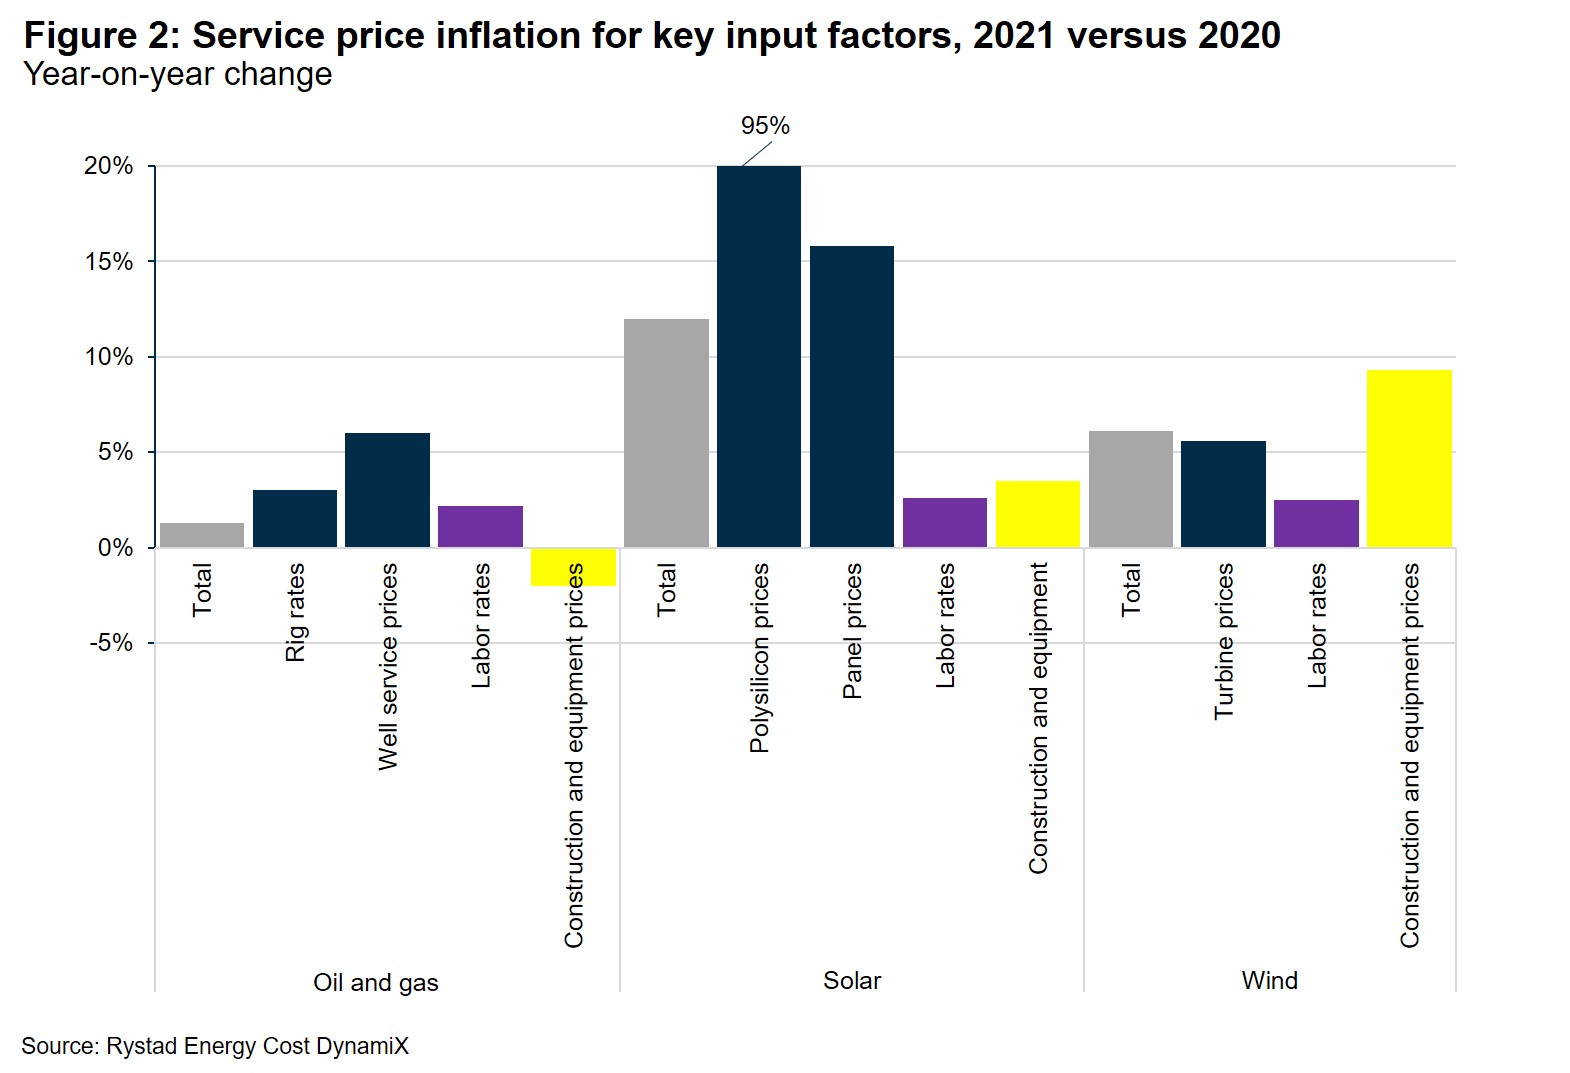 20210824_CostSolutions_Renewable energy inflation_Fig2.jpg